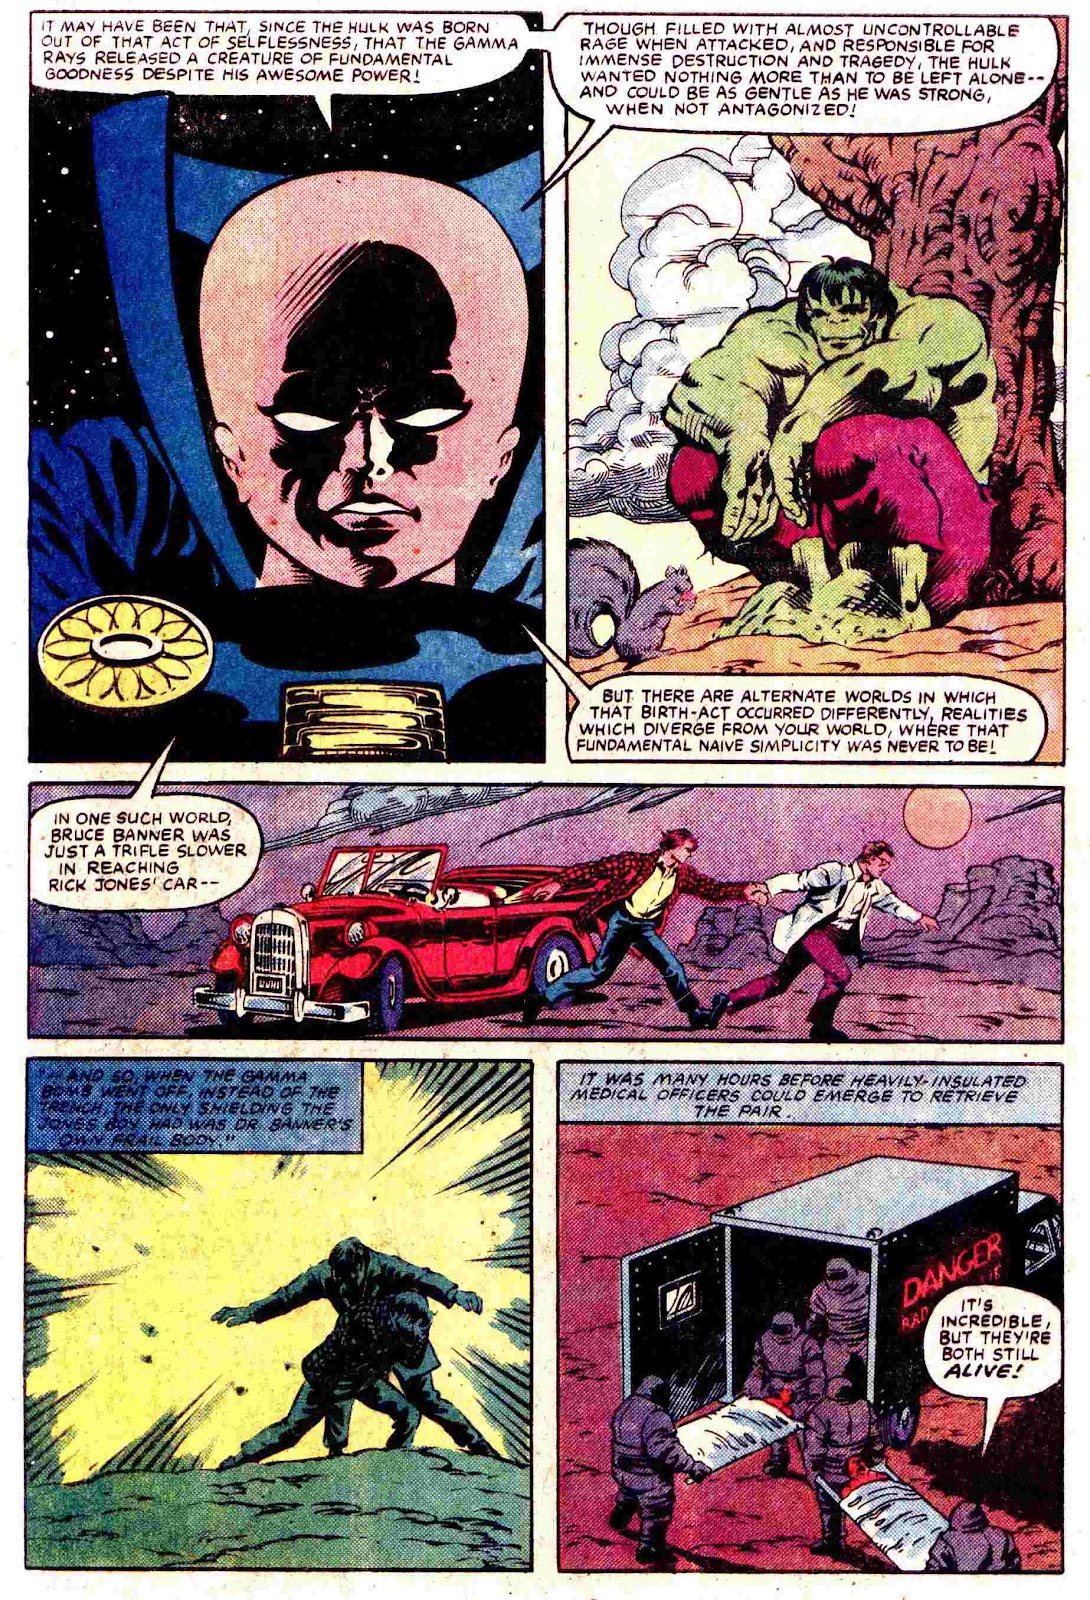 What If? (1977) issue 45 - The Hulk went Berserk - Page 4